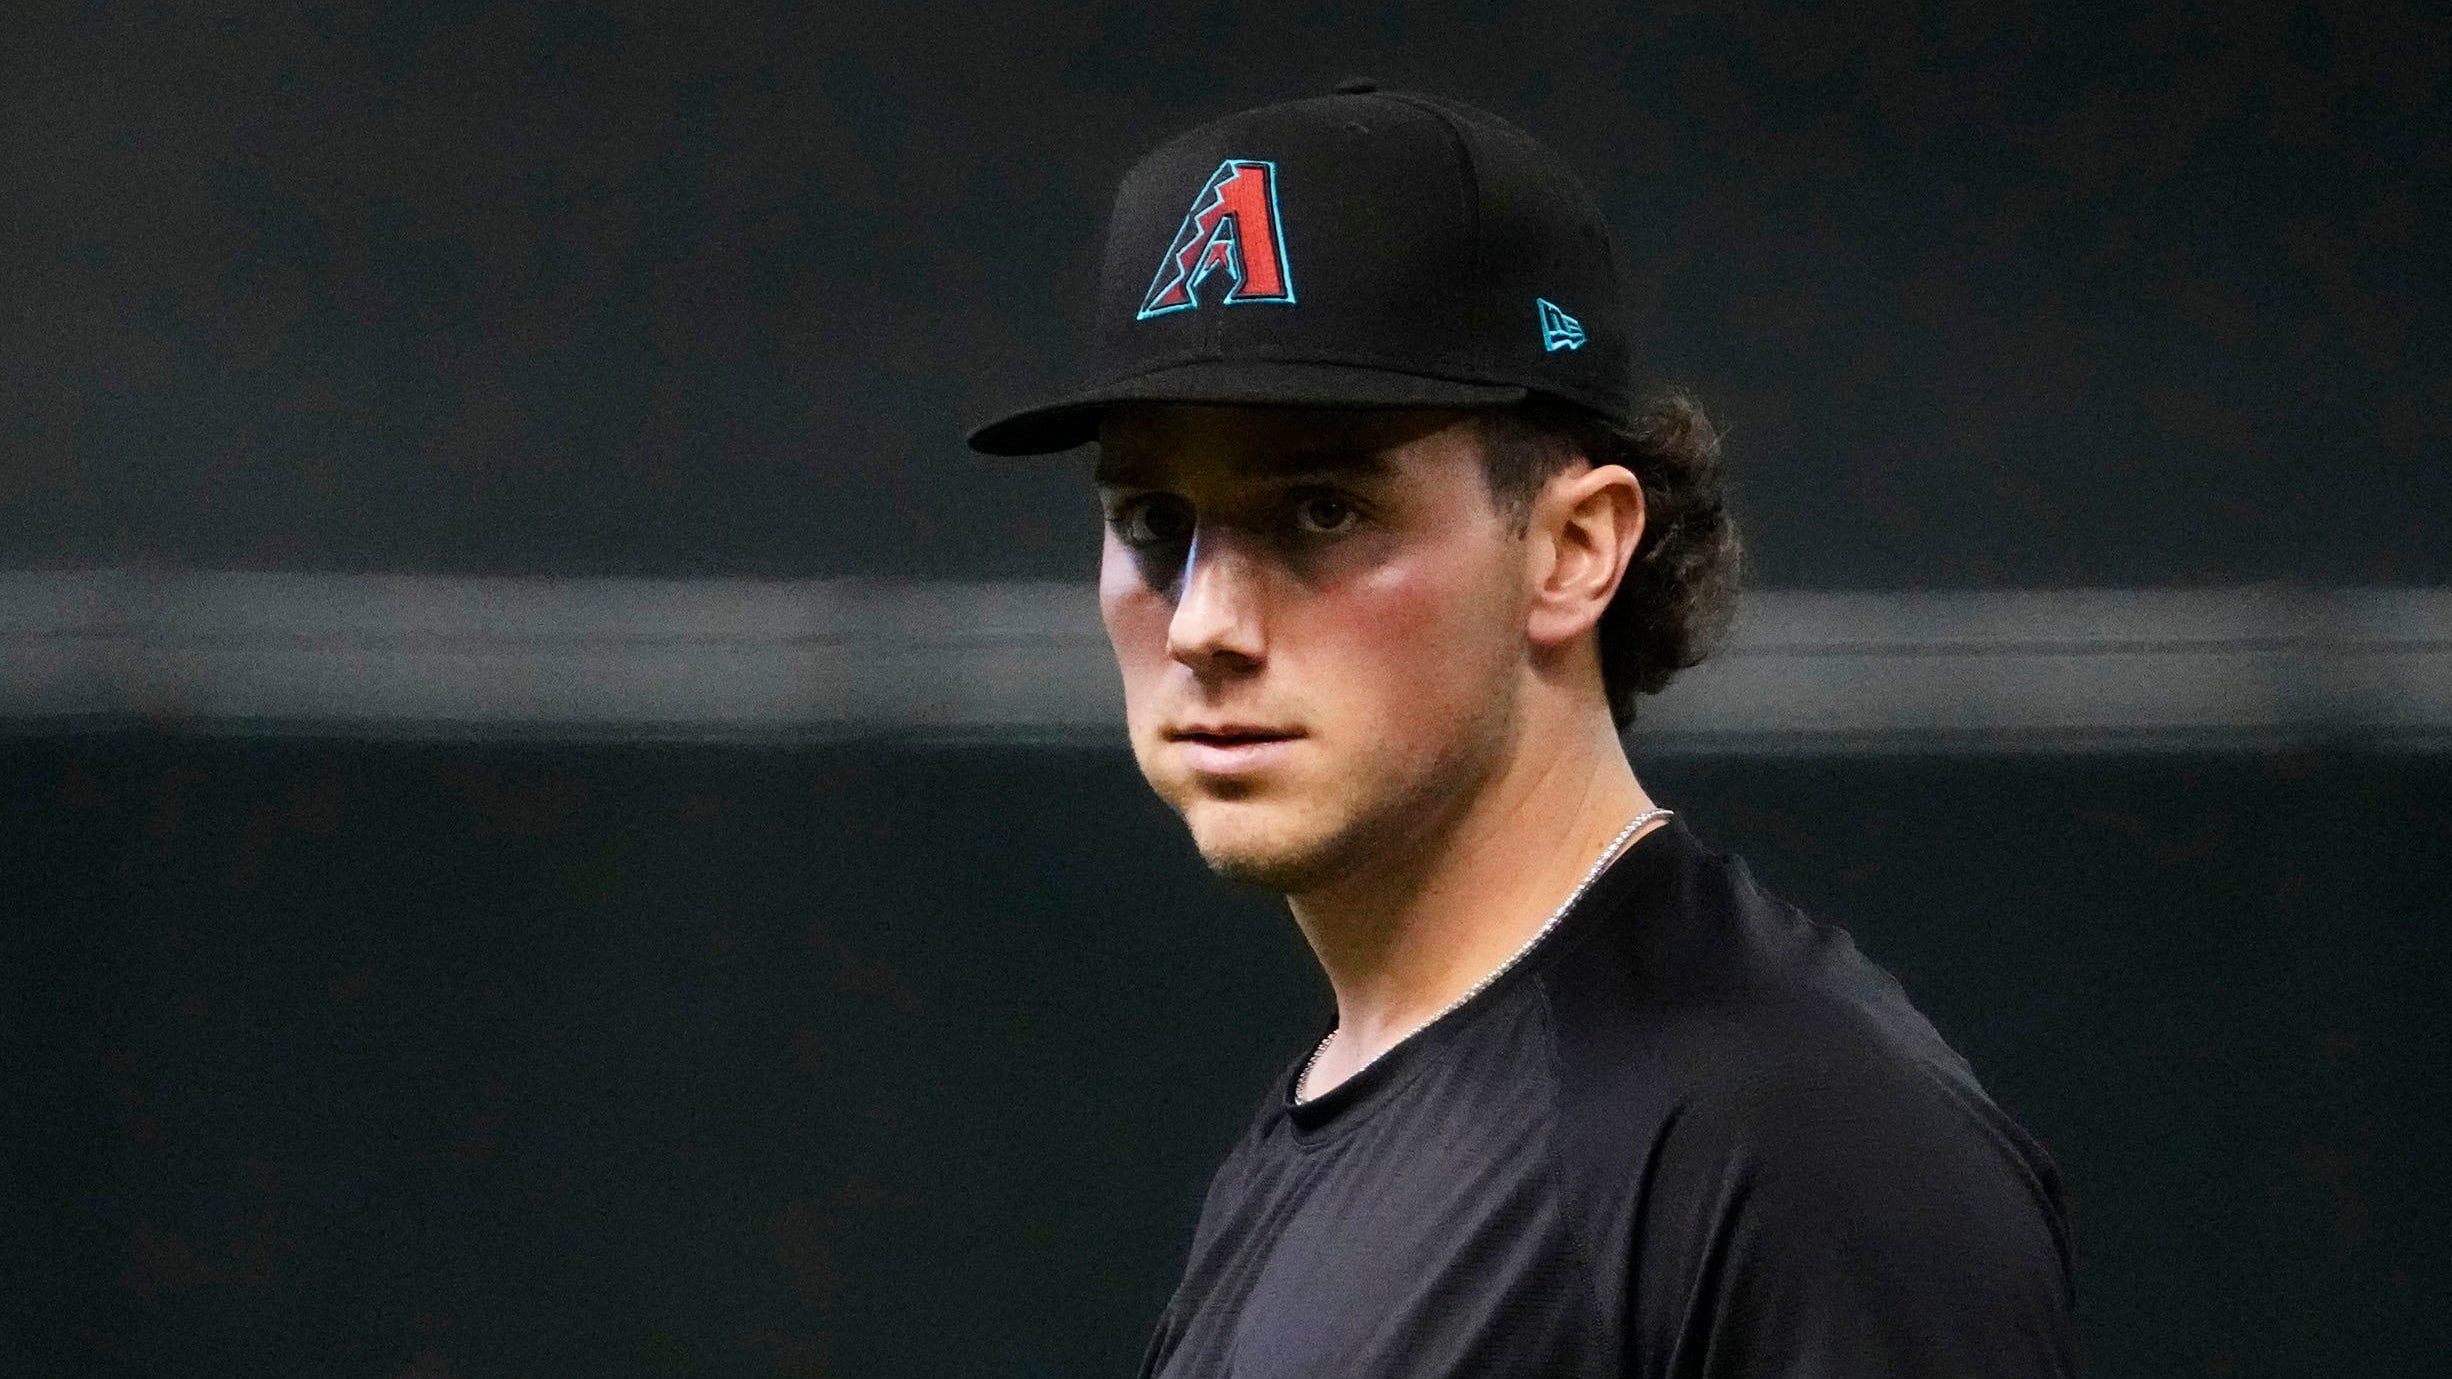 Arizona Diamondbacks right-handed pitcher Brandon Pfaadt works out at Chase Field before Game 3 of the World Series.